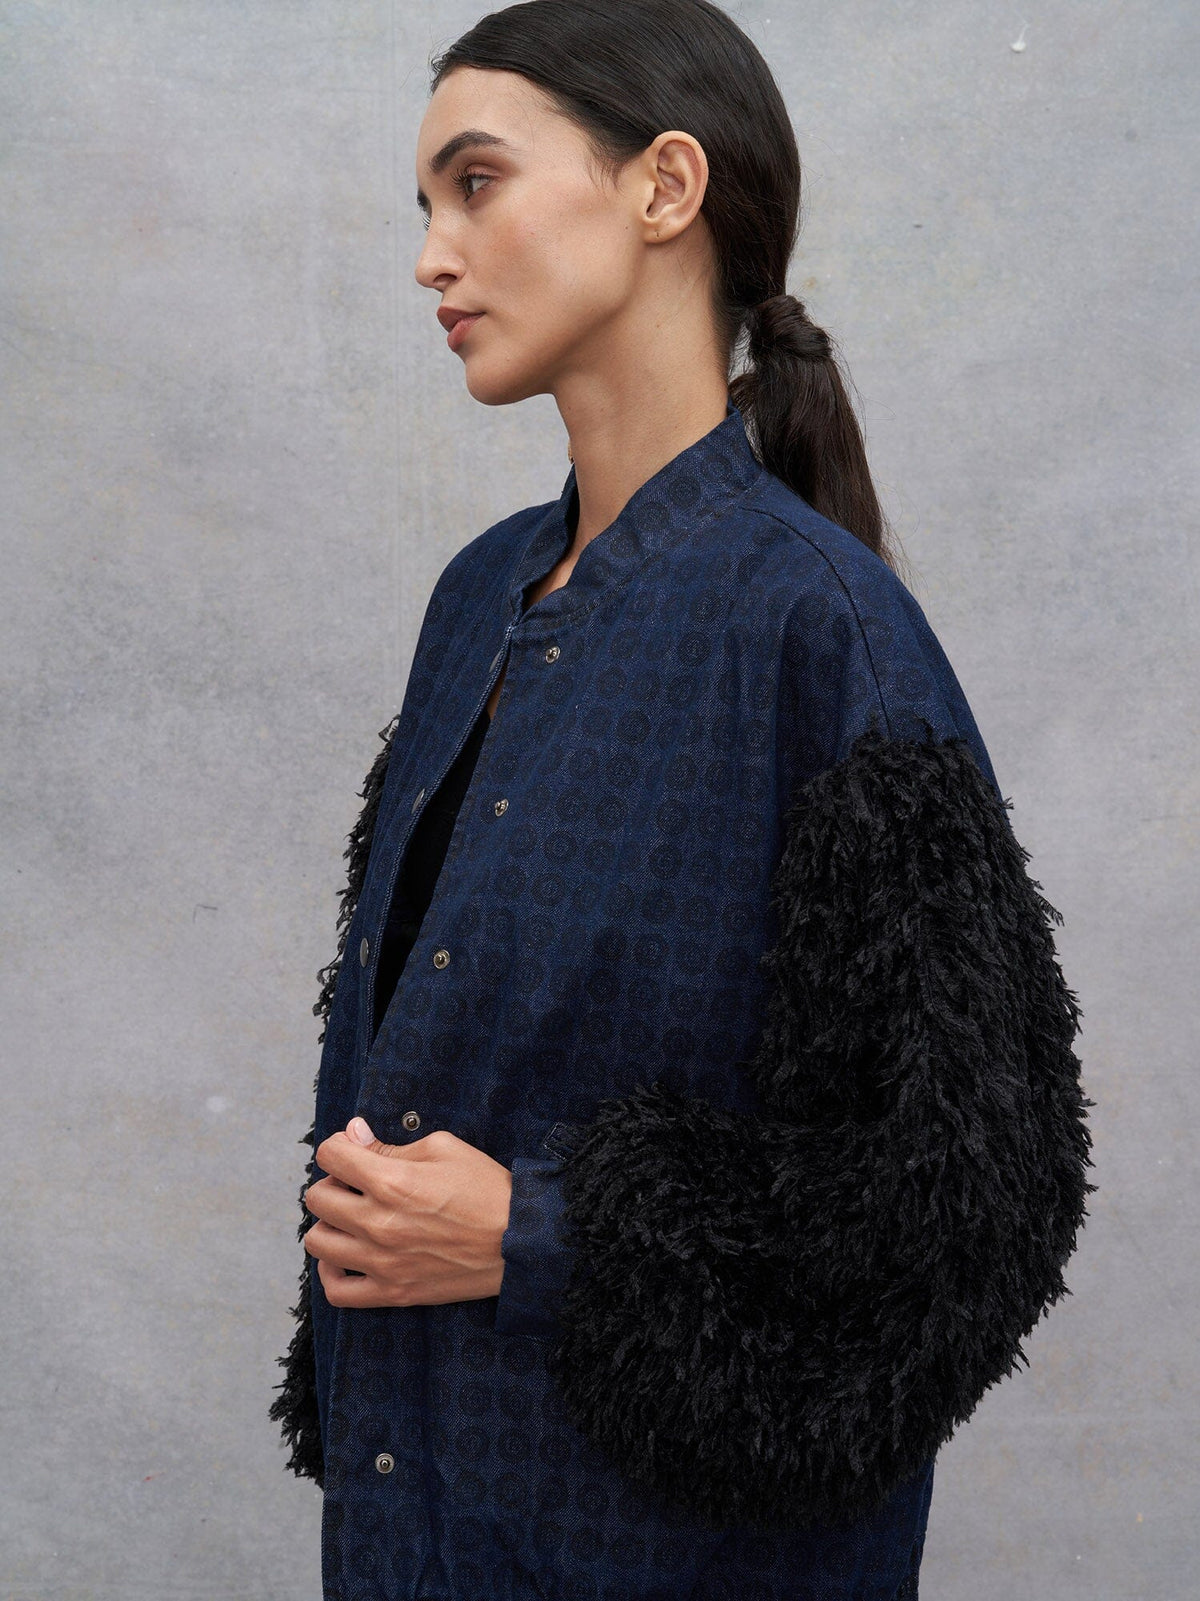 HENRI - Oversized Bombers with elasticated bottom in blue denim with crest and feather print Black Jacket Fête Impériale